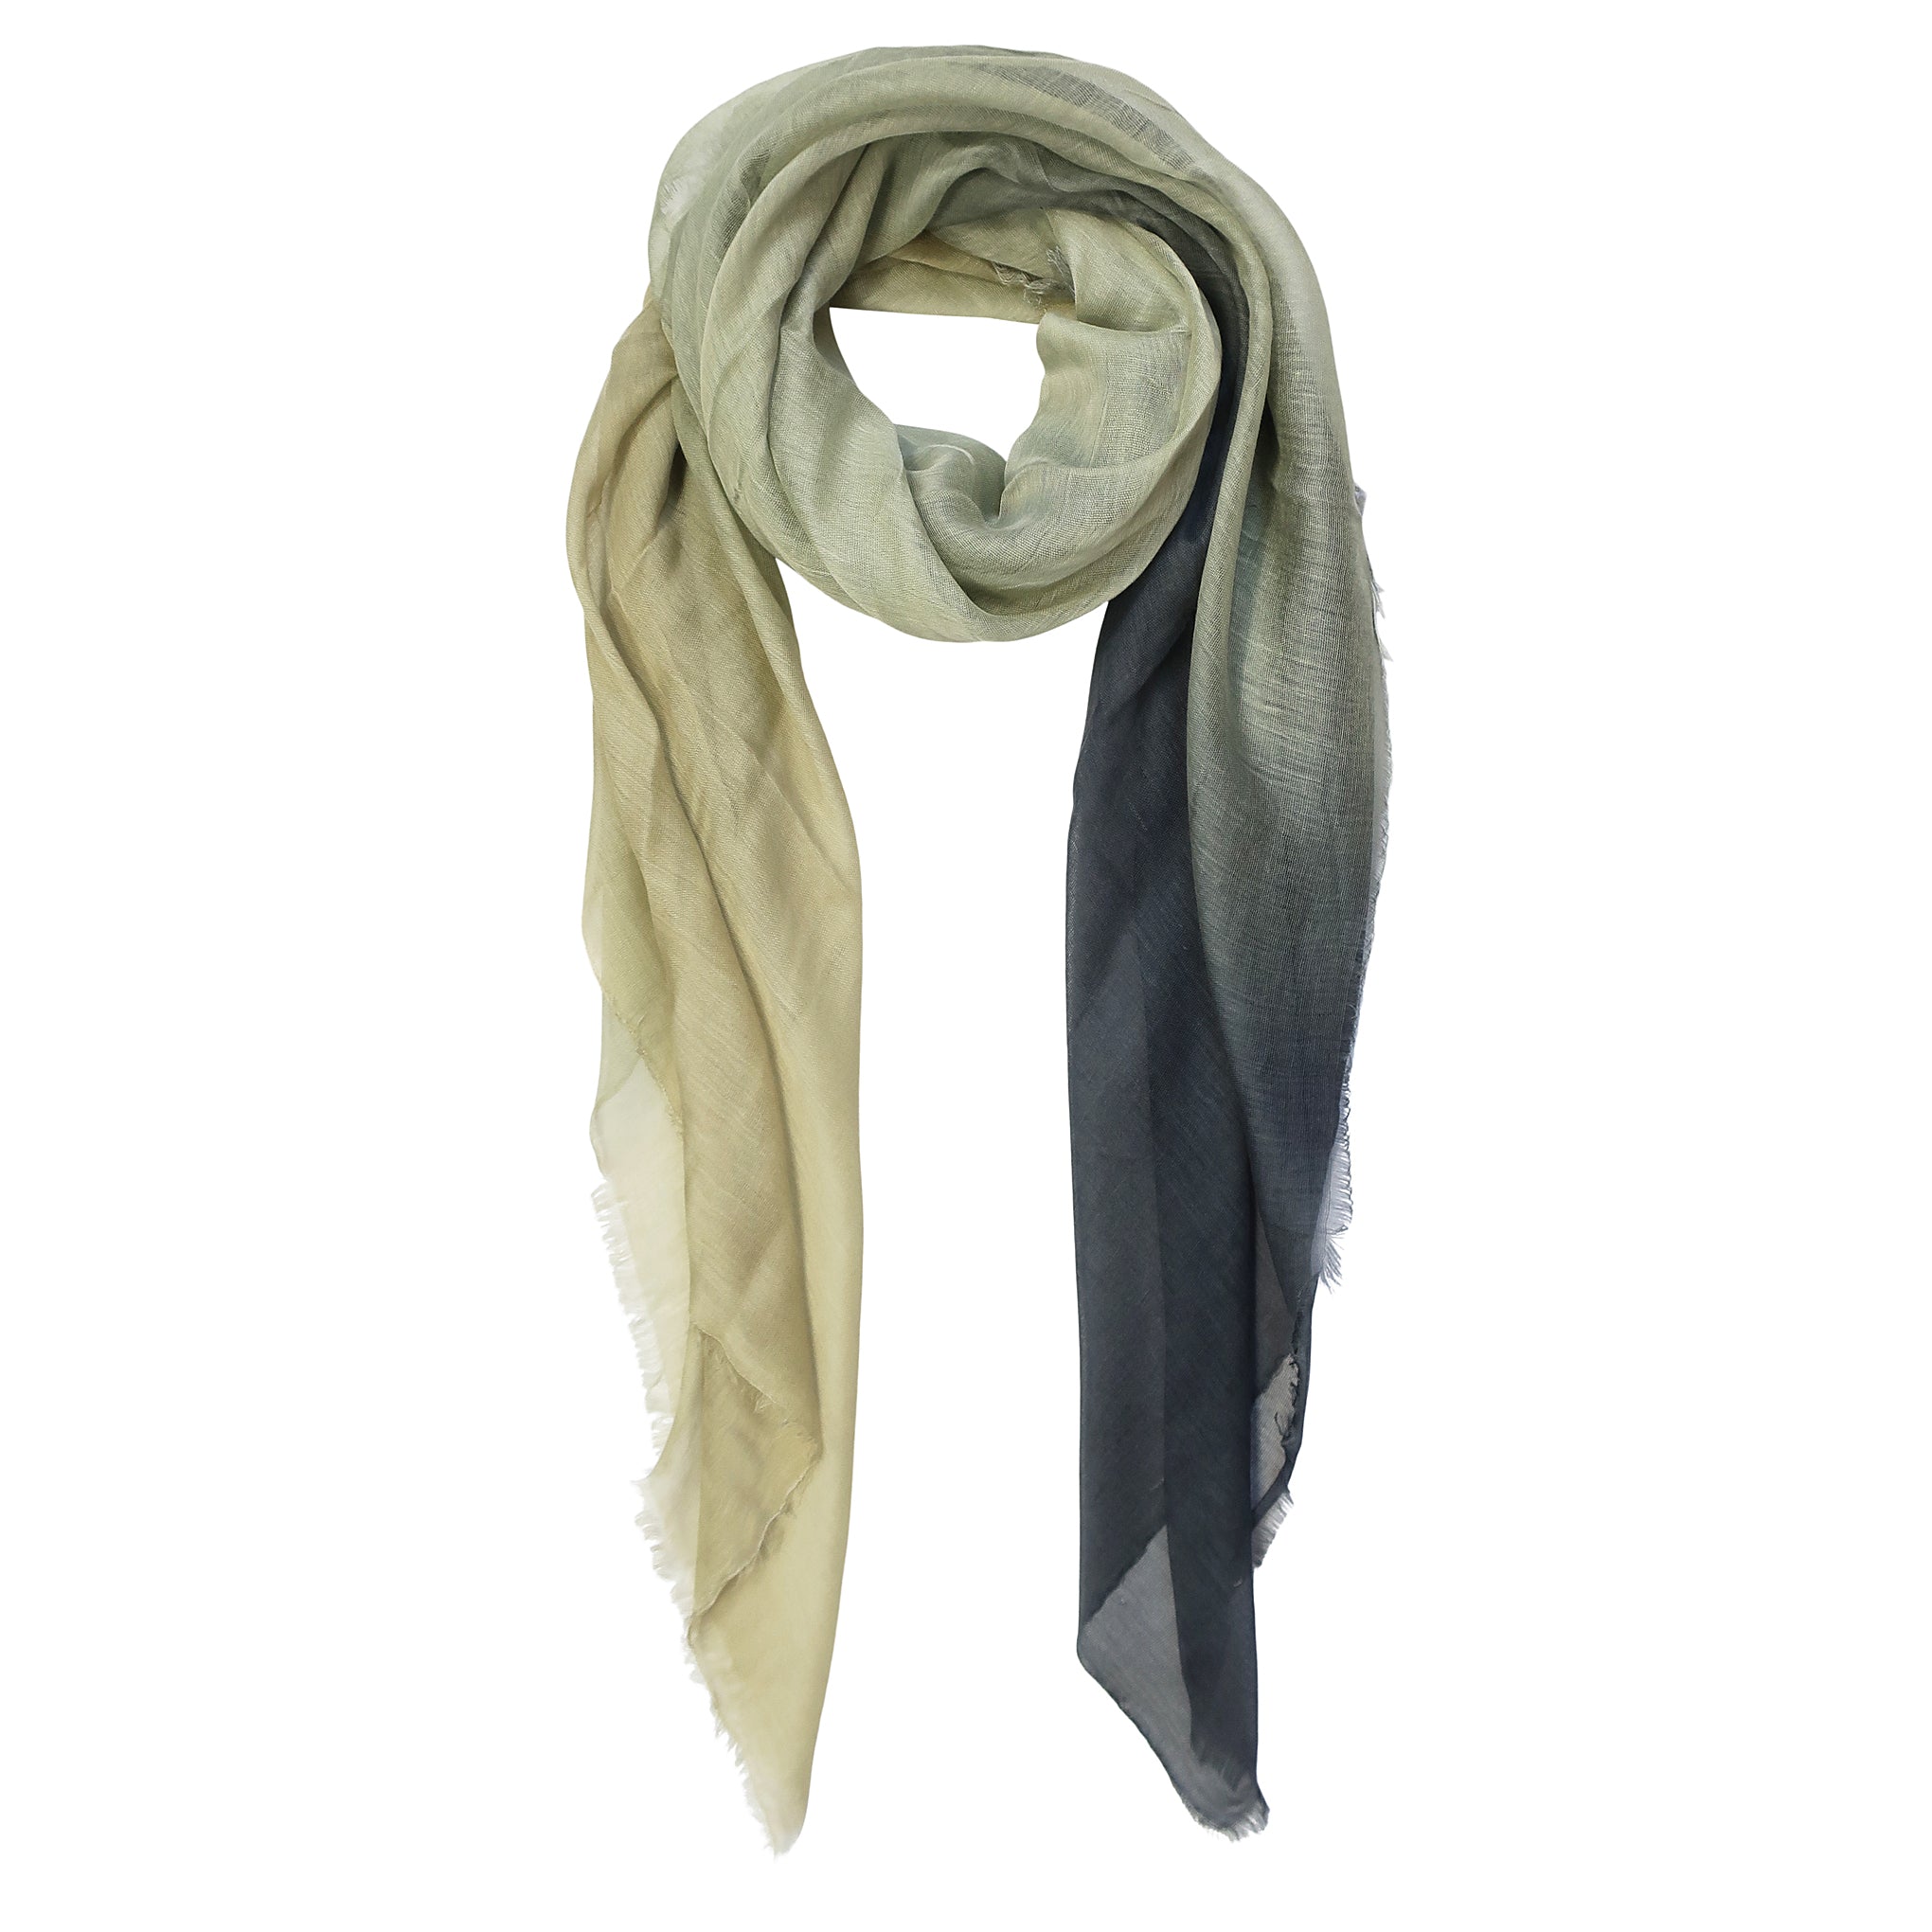 Blue Pacific Dream Cashmere and Silk Scarf in Slate, Green, and Yellow 47 x 37